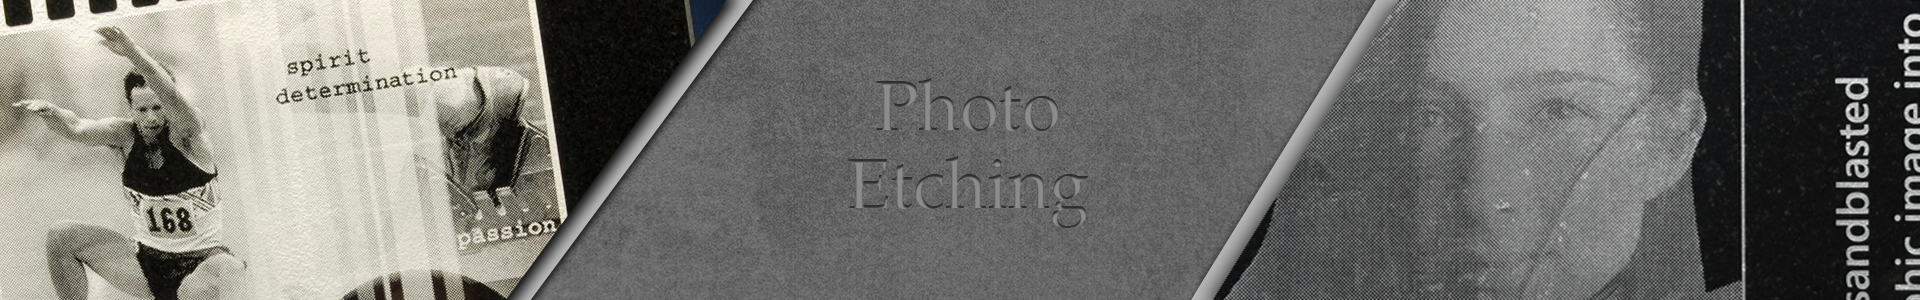 photo-etching-banner.png